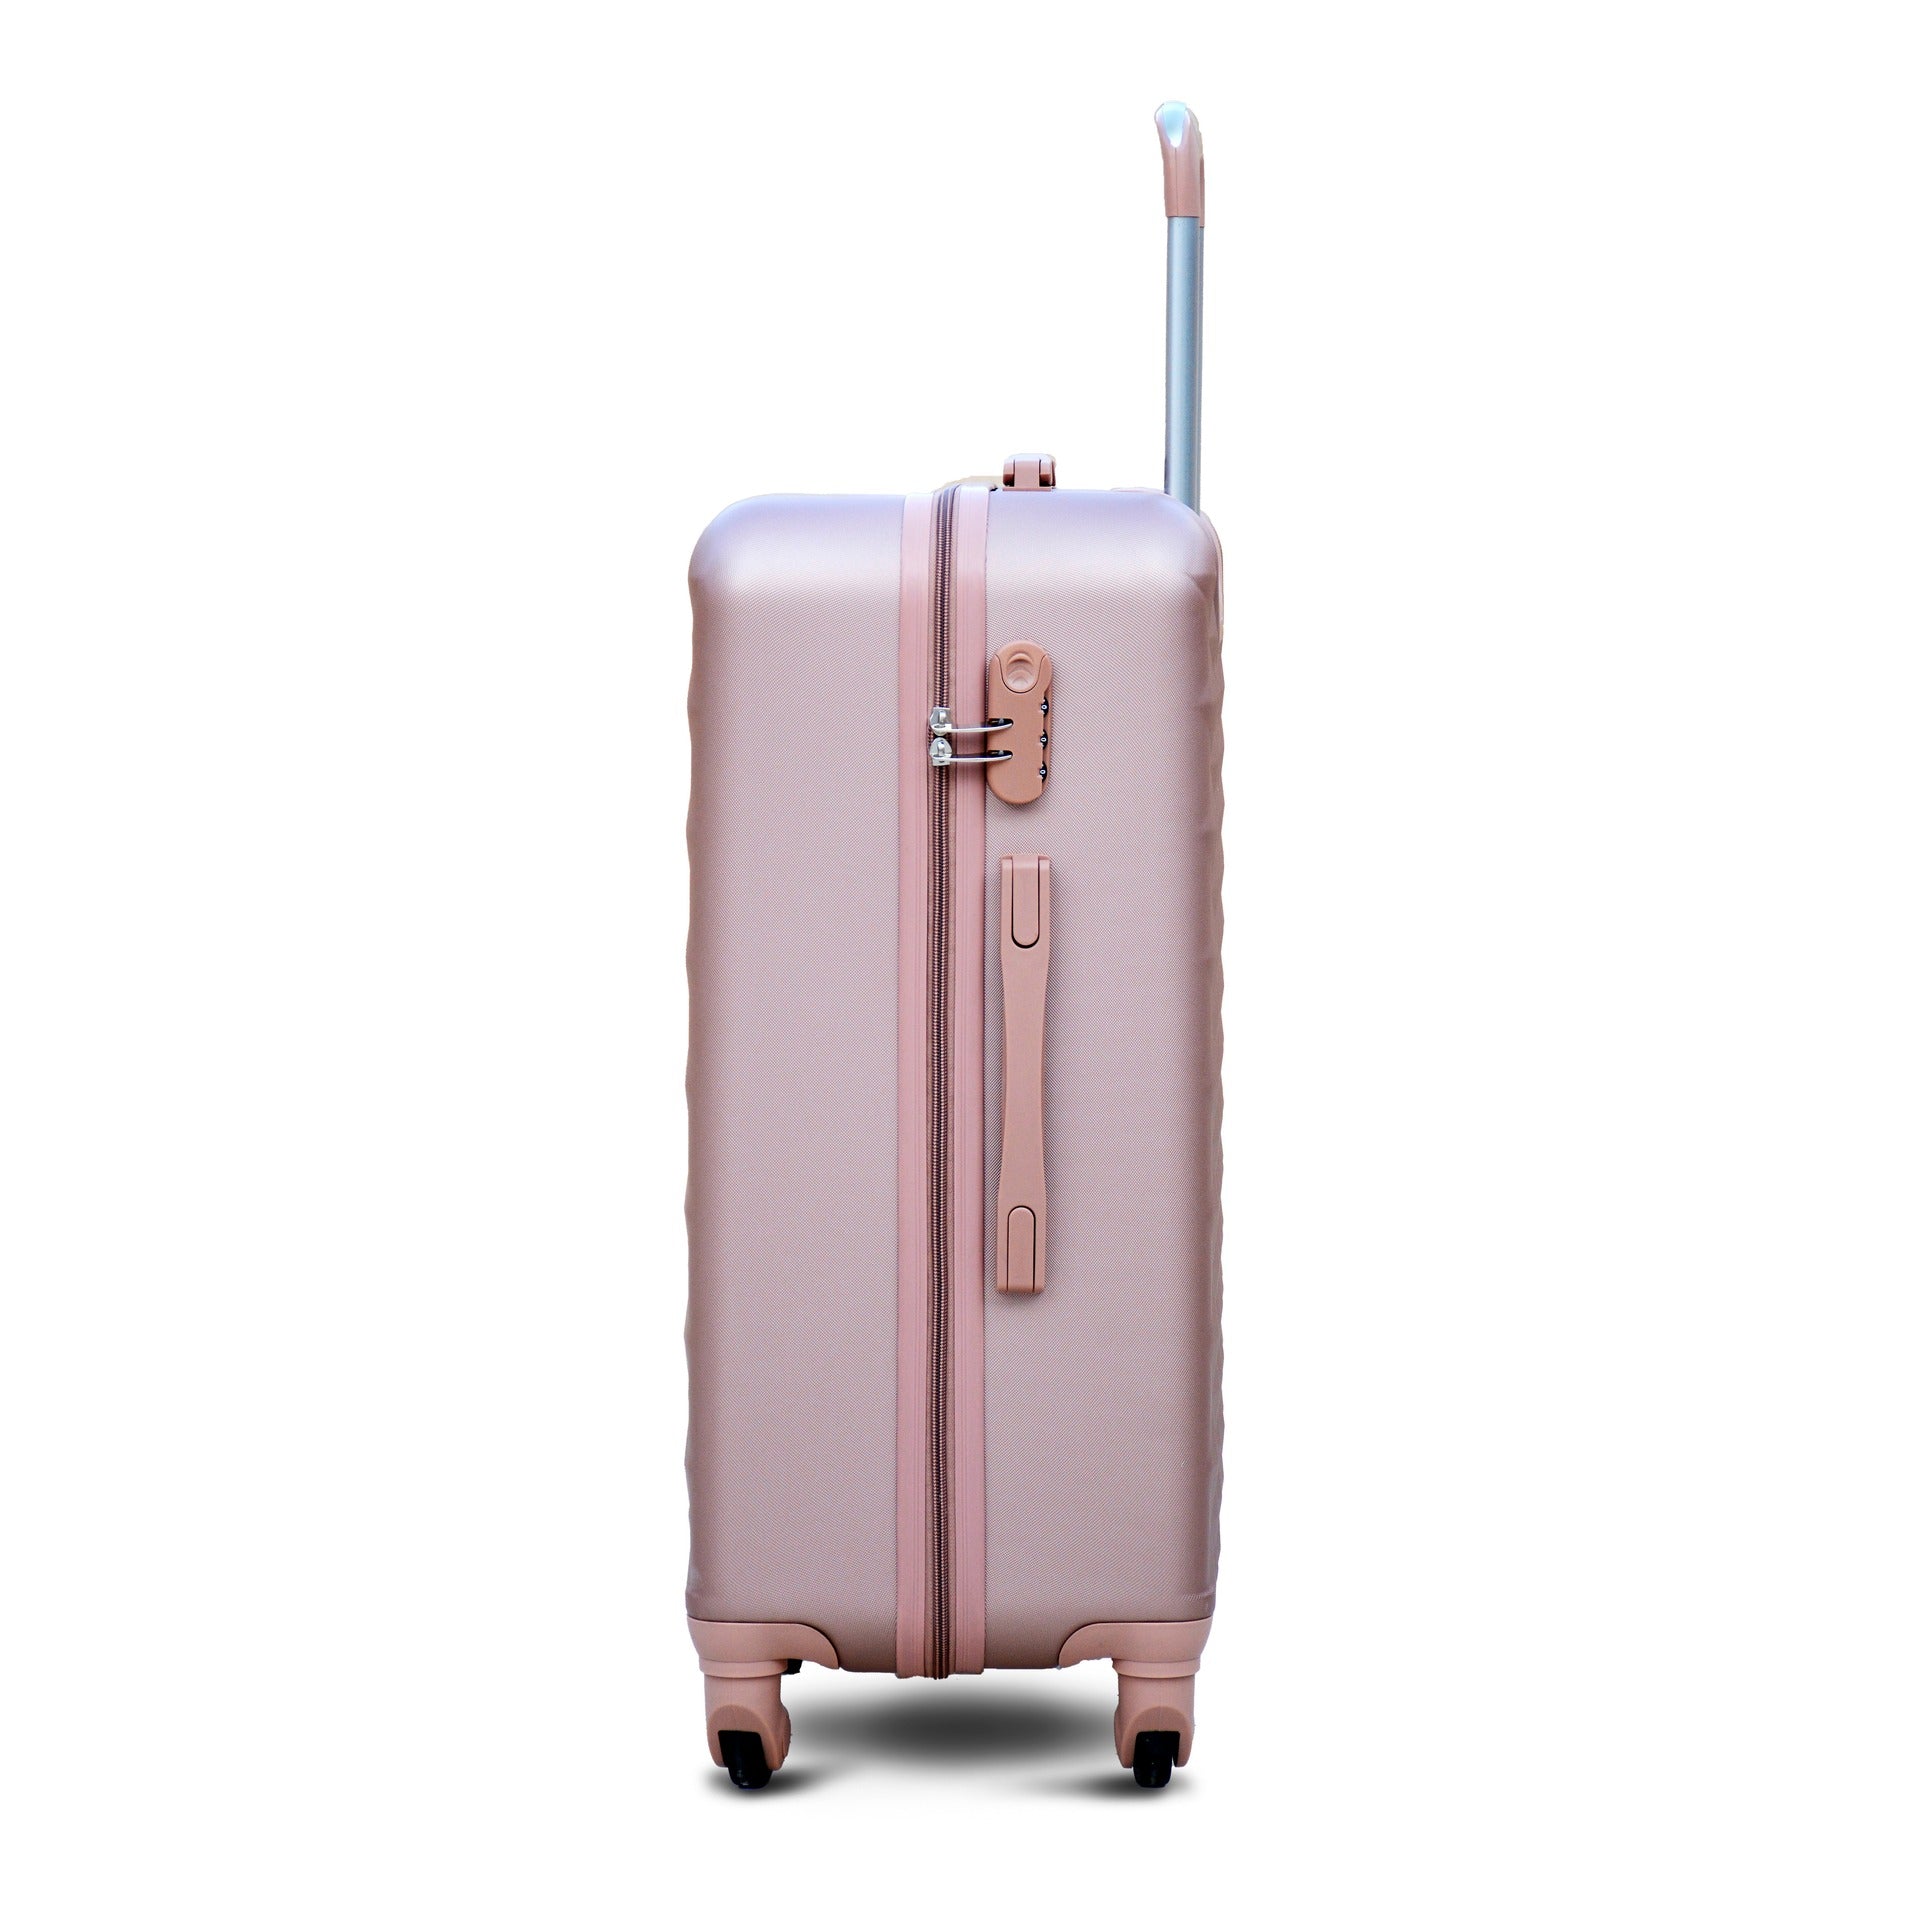 28" Rose Gold Colour Diamond Cut ABS Lightweight Luggage Hard Case Spinner Wheel Trolley Bag